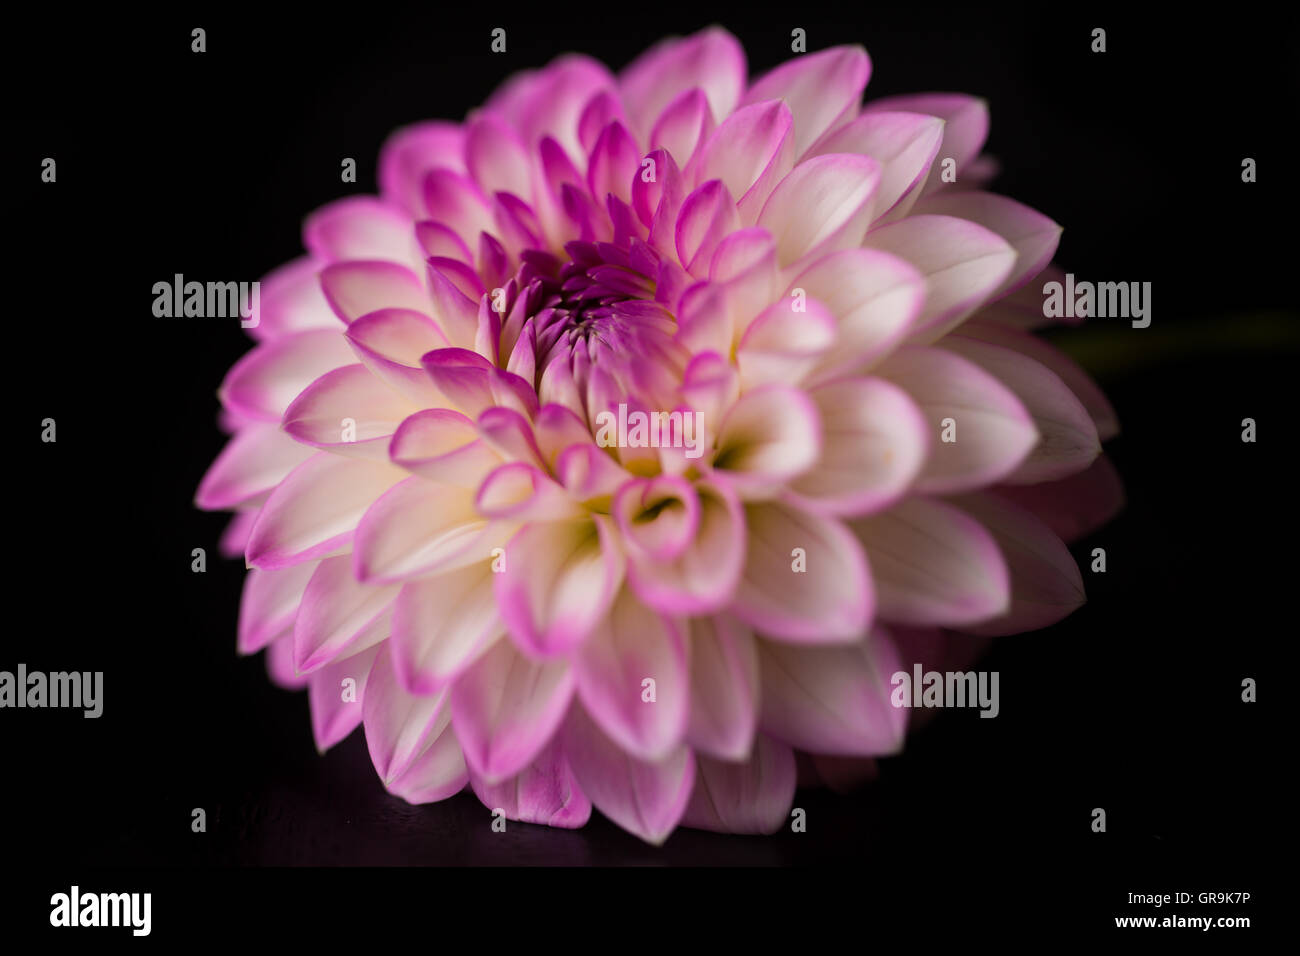 close up of a dahlia on black background Stock Photo